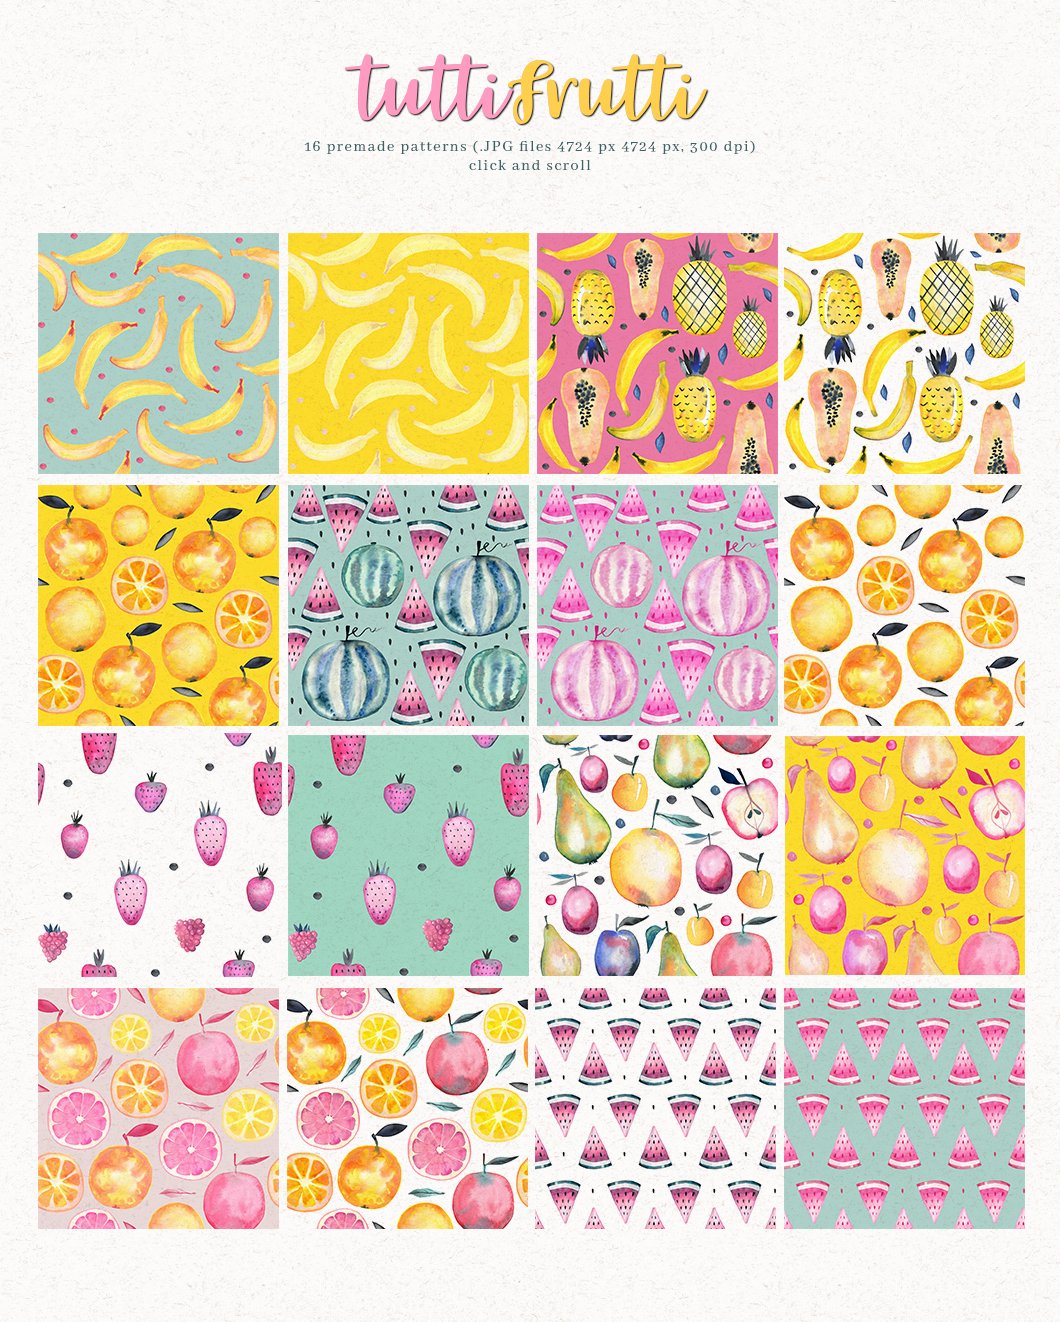 Pink-yellow lettering "Tutti Frutti" and 16 premade patterns with tutti frutti on a gray background.